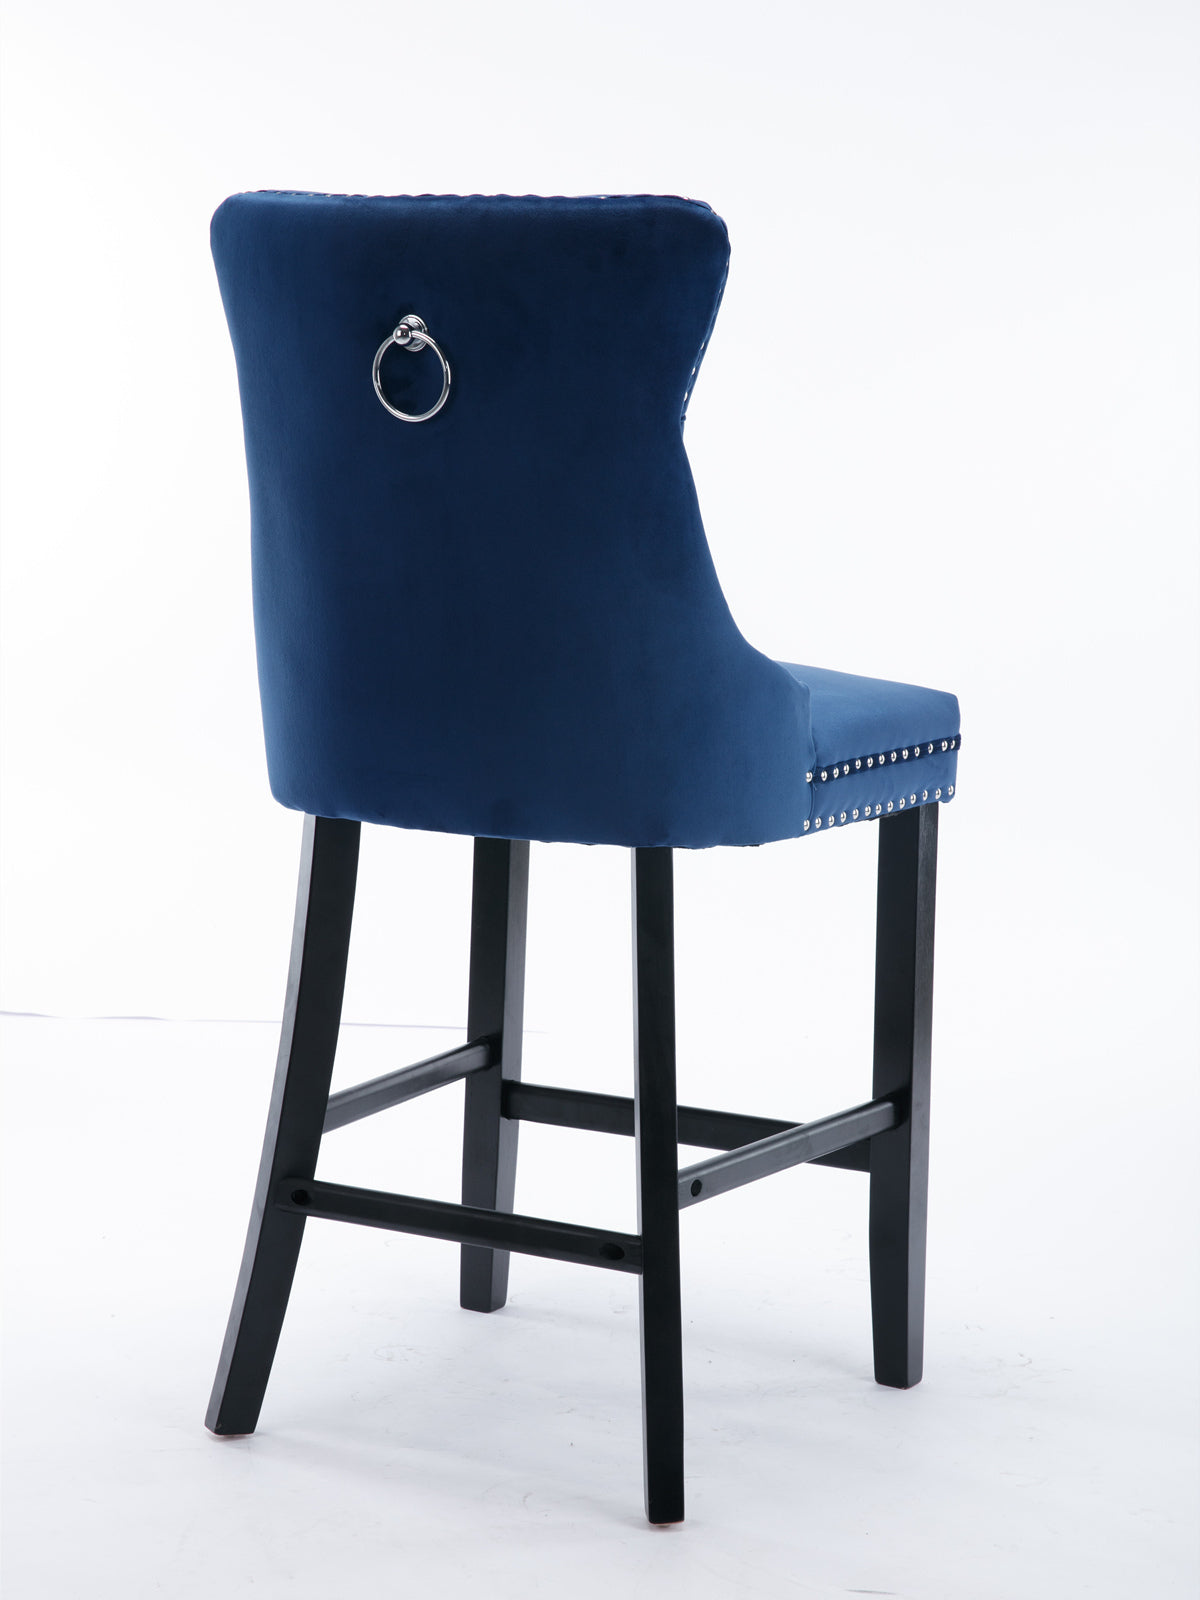 Set of 2 Blue Velvet Counter Stools Tufted Back with Nailhead Trim and Ring Pull